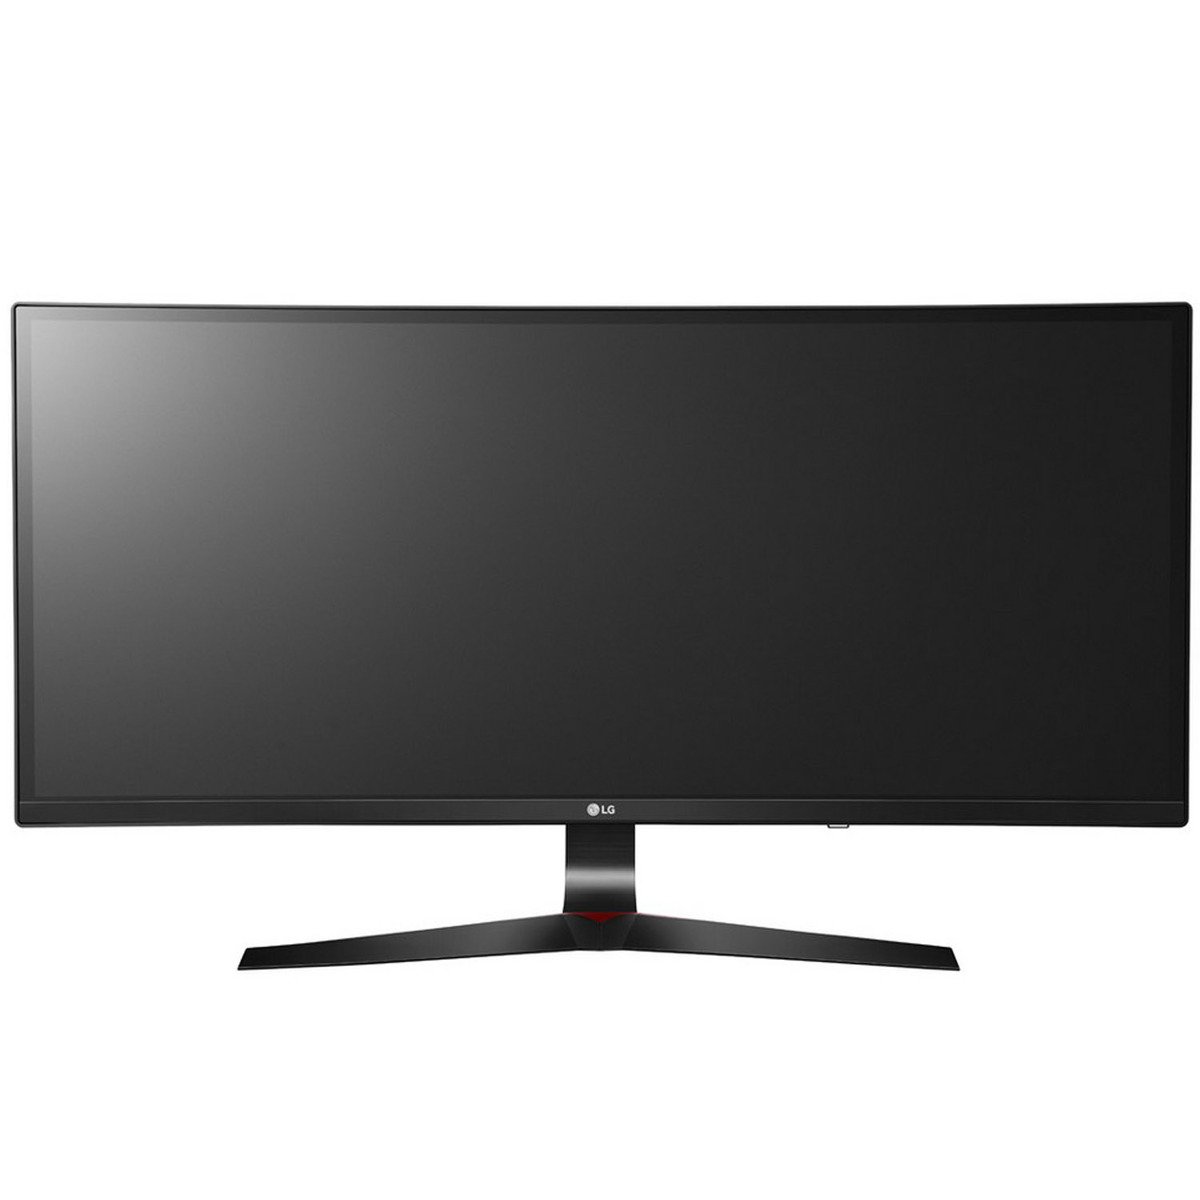 LG Curved LED Gaming Monitor 34UC79G 34inch